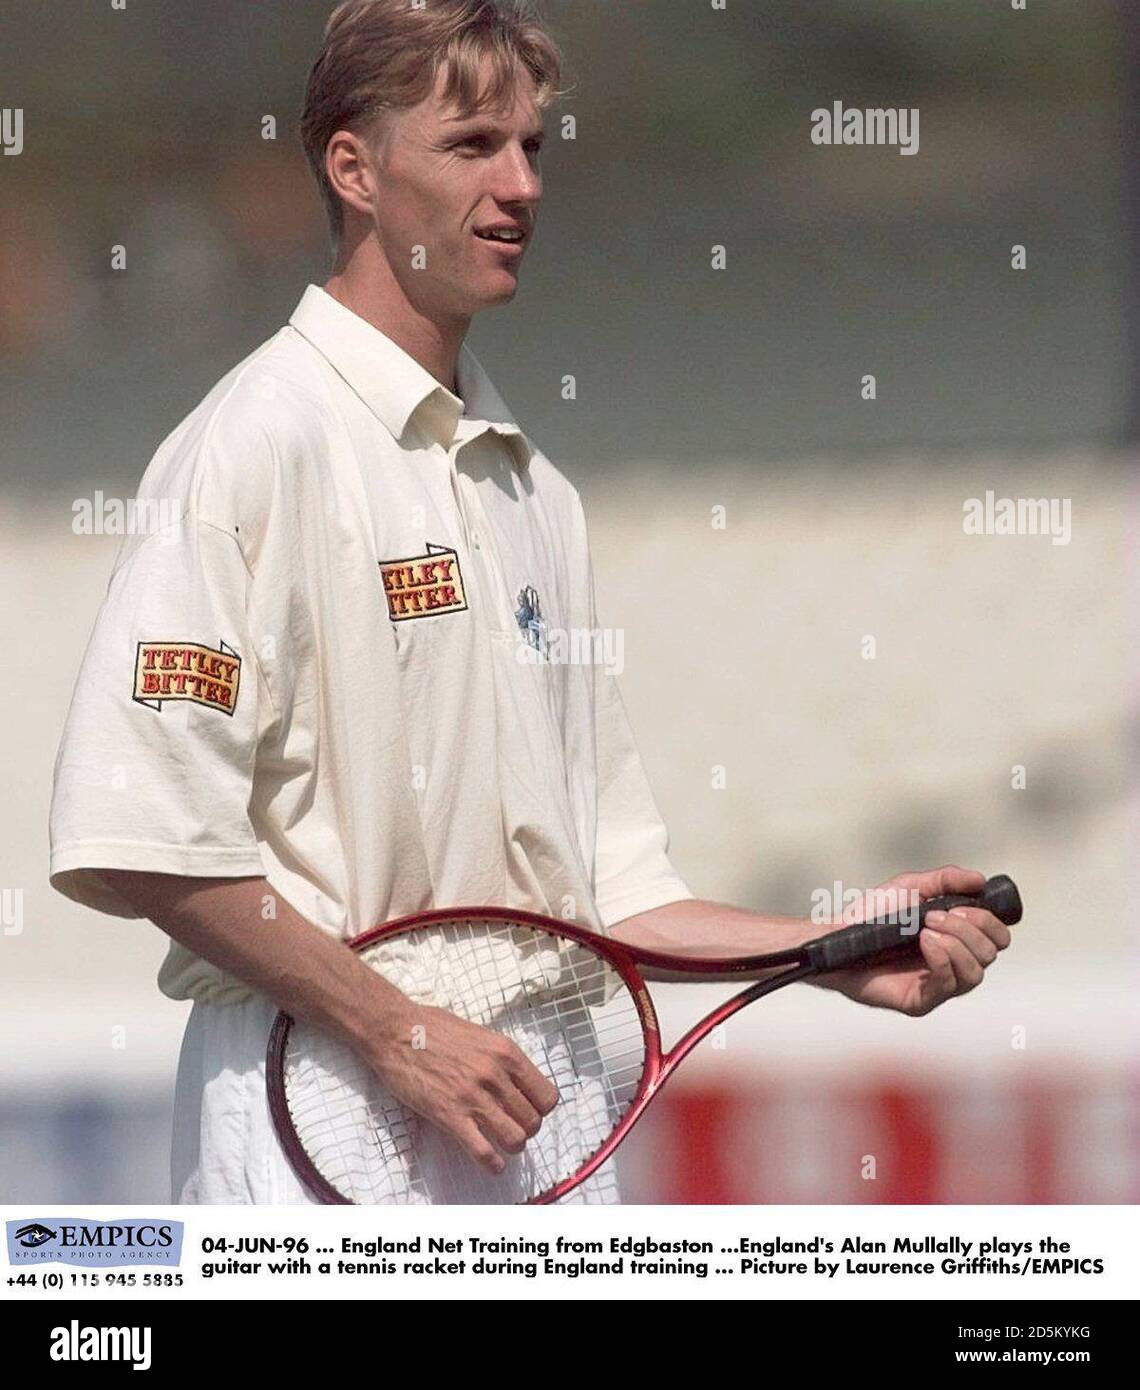 04-JUN-96 ... England Net Training from Edgbaston ...England's Alan Mullally plays the guitar with a tennis racquet during England training ... Picture by Laurence Griffiths/EMPICS Stock Photo